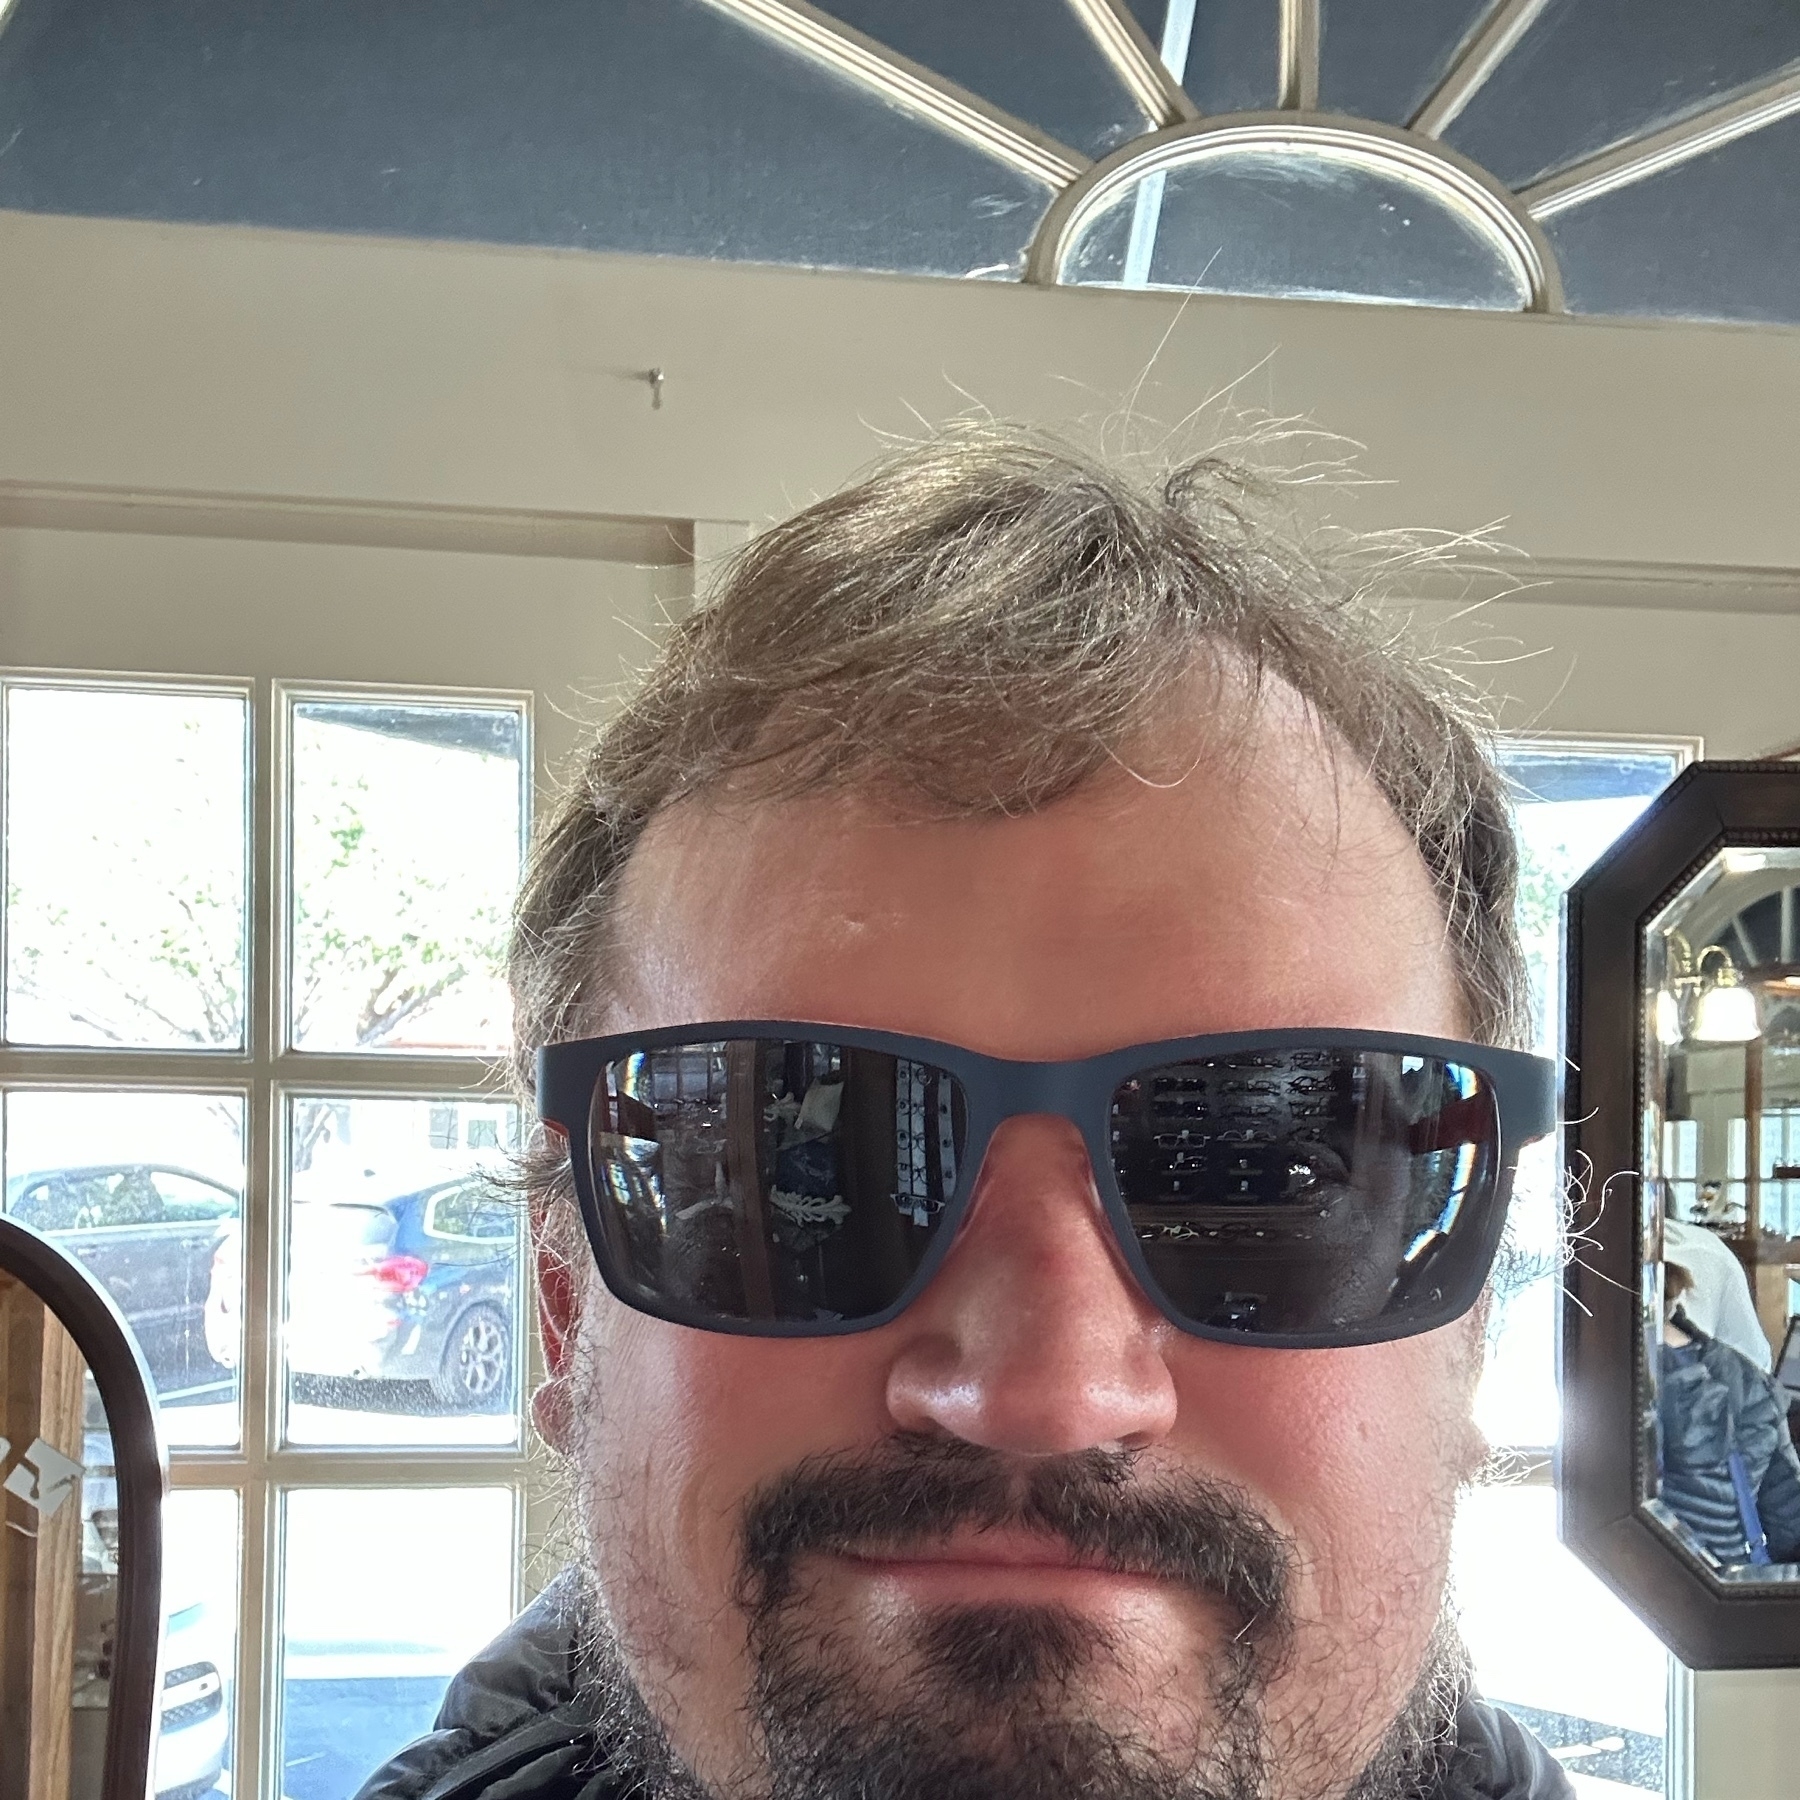 Photo of Grant Hutchins indoors wearing new sunglasses